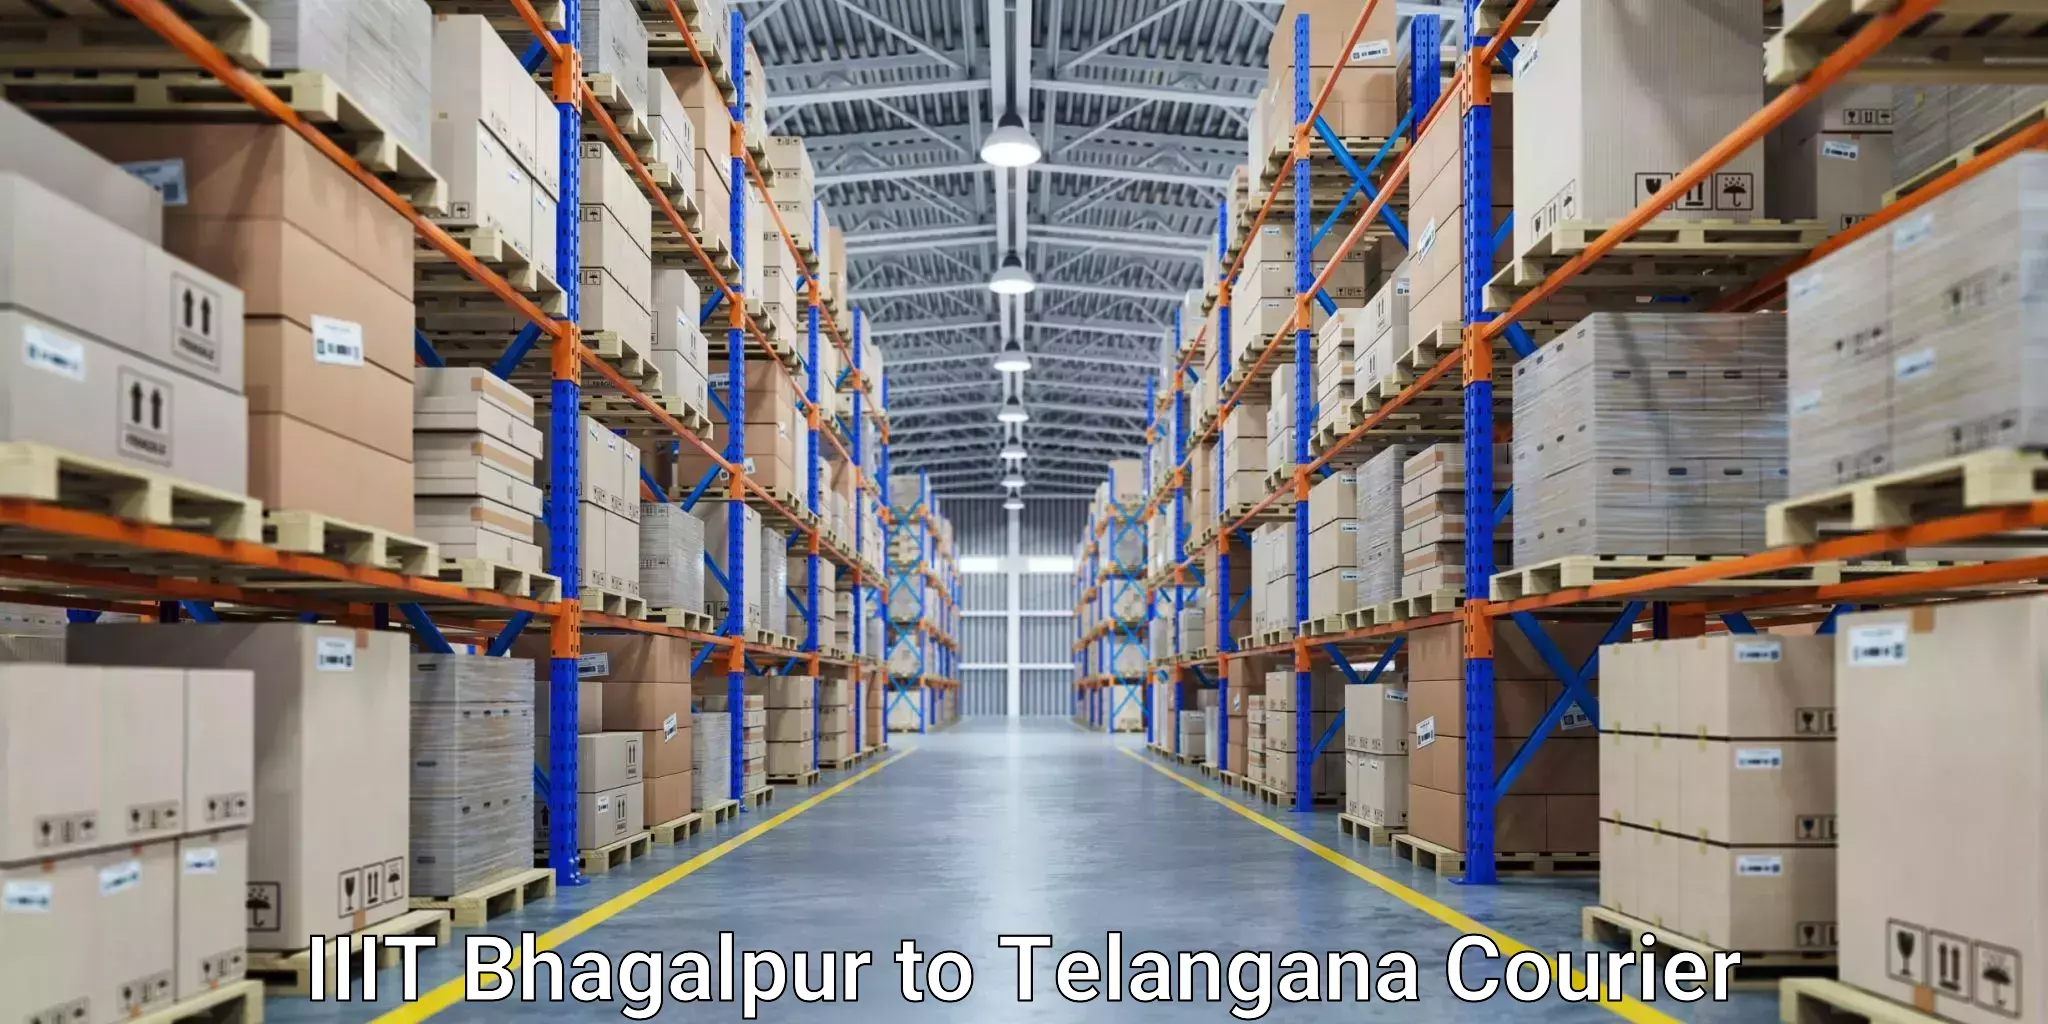 Courier service comparison in IIIT Bhagalpur to Sathupally